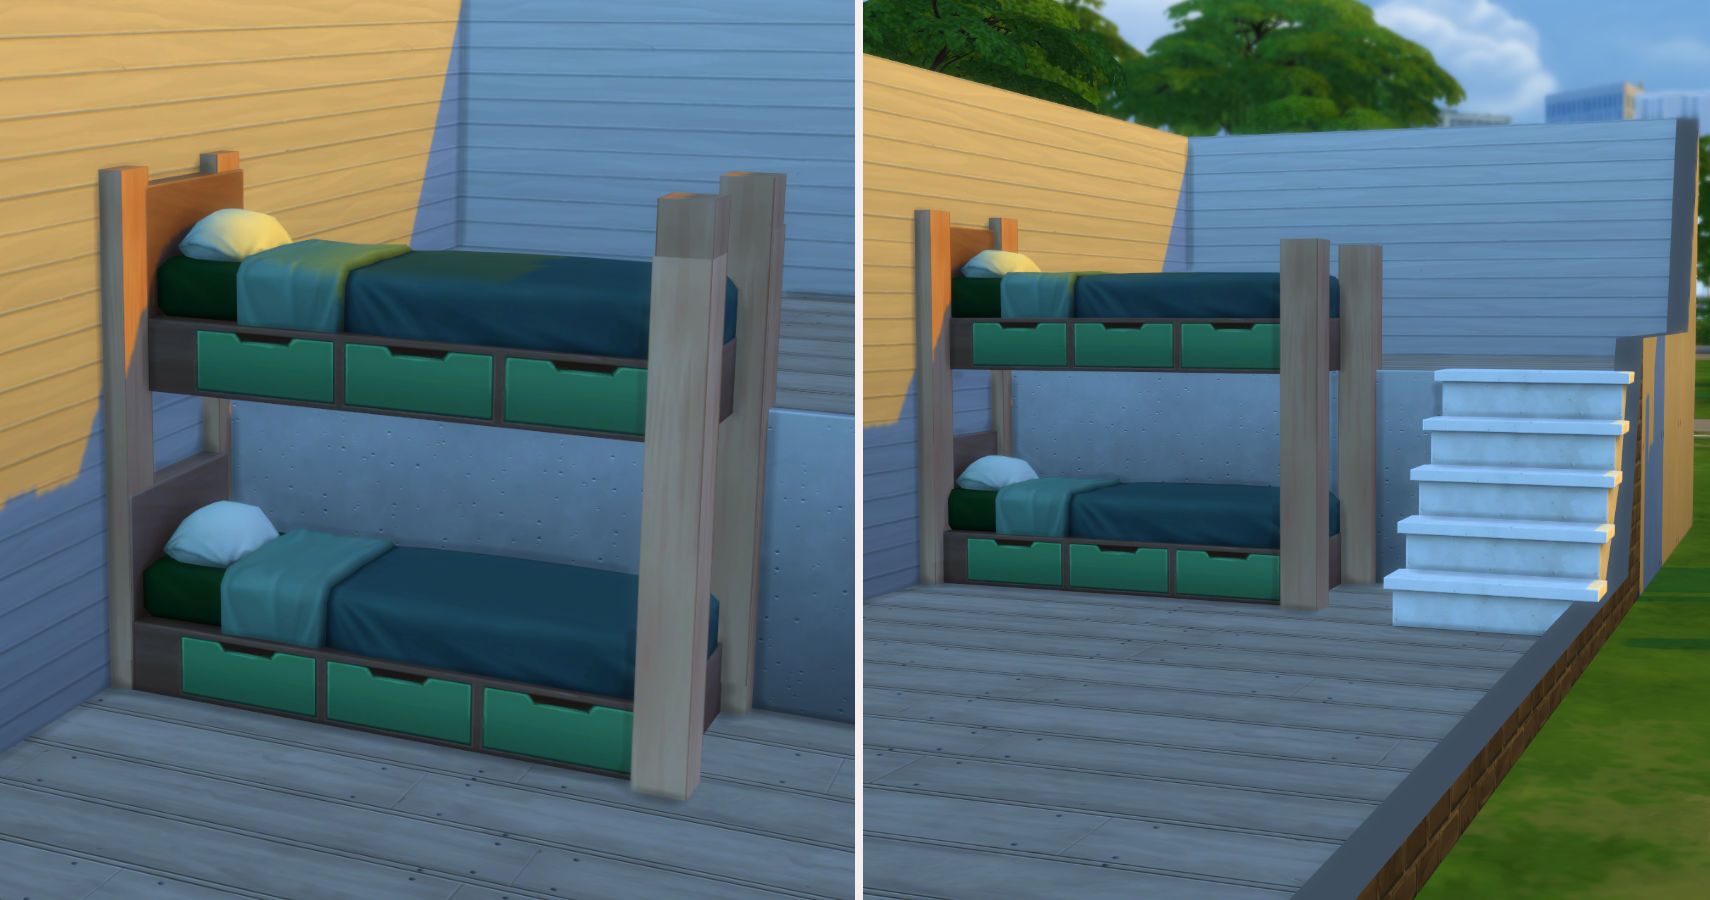 Split image. Left side two beds on top of each other. Right side stairs placed next to them.